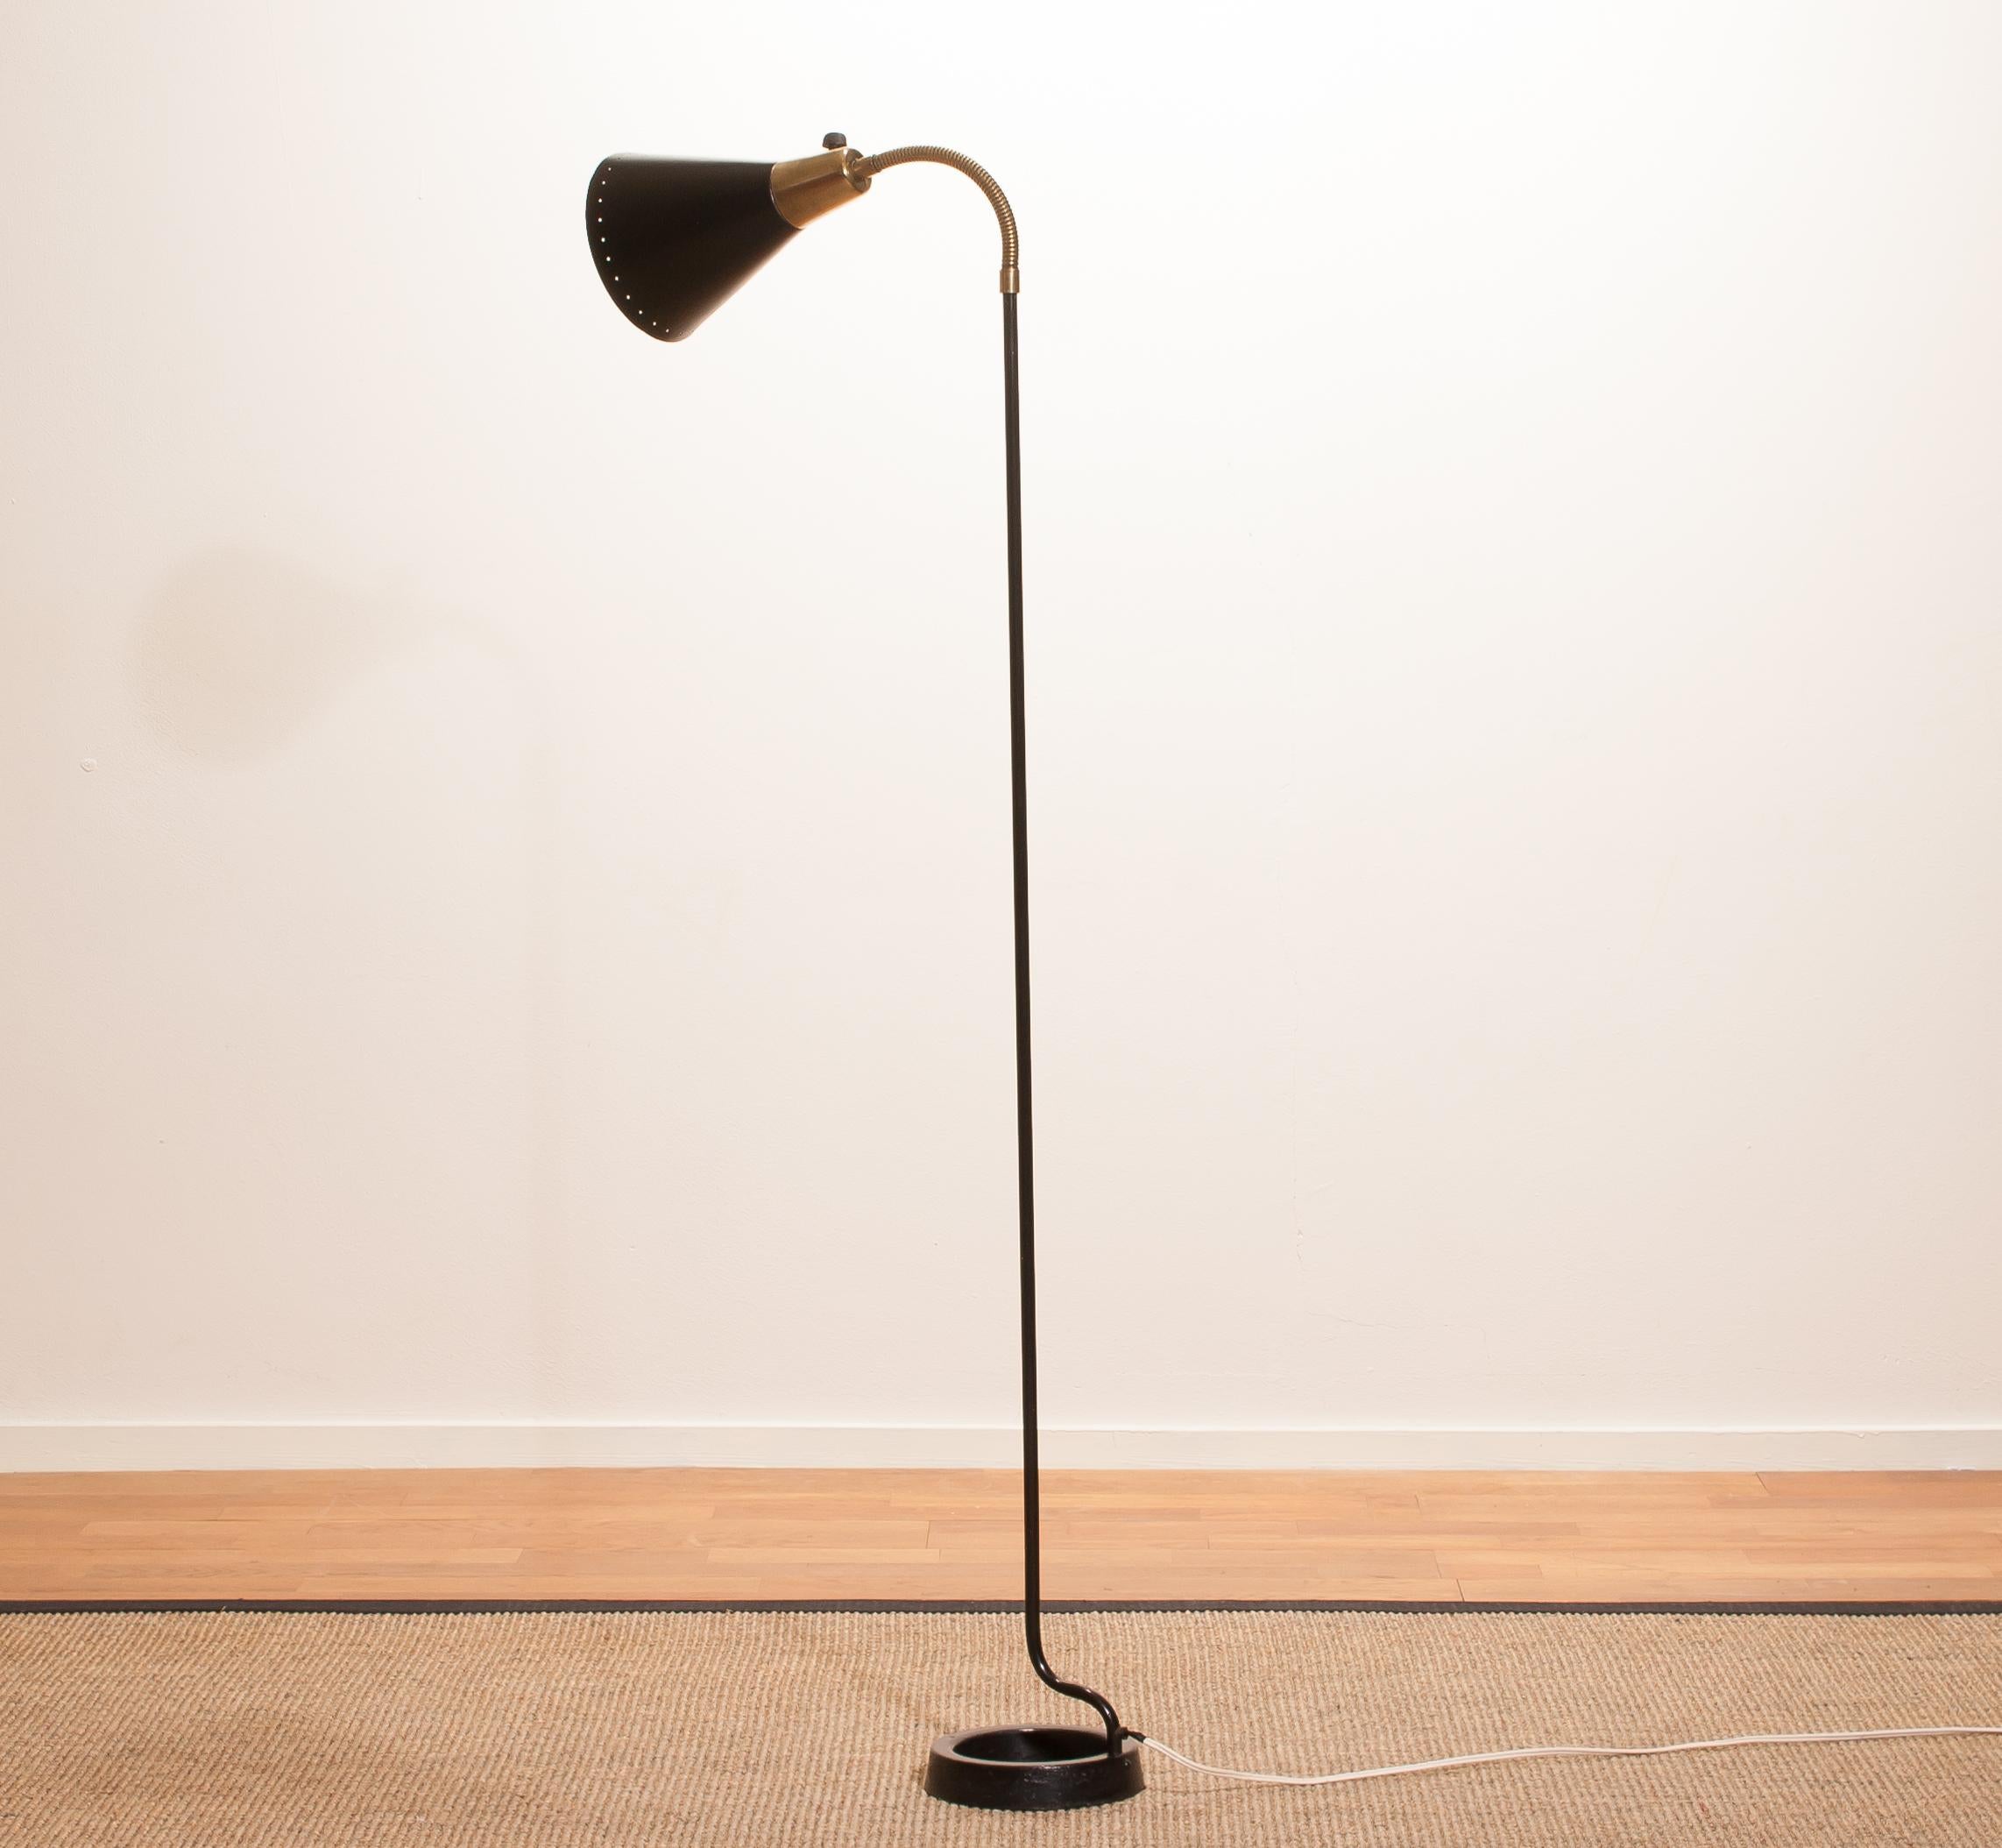 Beautiful floor lamp made in Sweden.
This lamp is made of black metal with brass details and has a very rare stand.
It has a perforated shade which gives a wonderful shining.
It is in an original and working condition.
Period 1940s.
Dimensions: